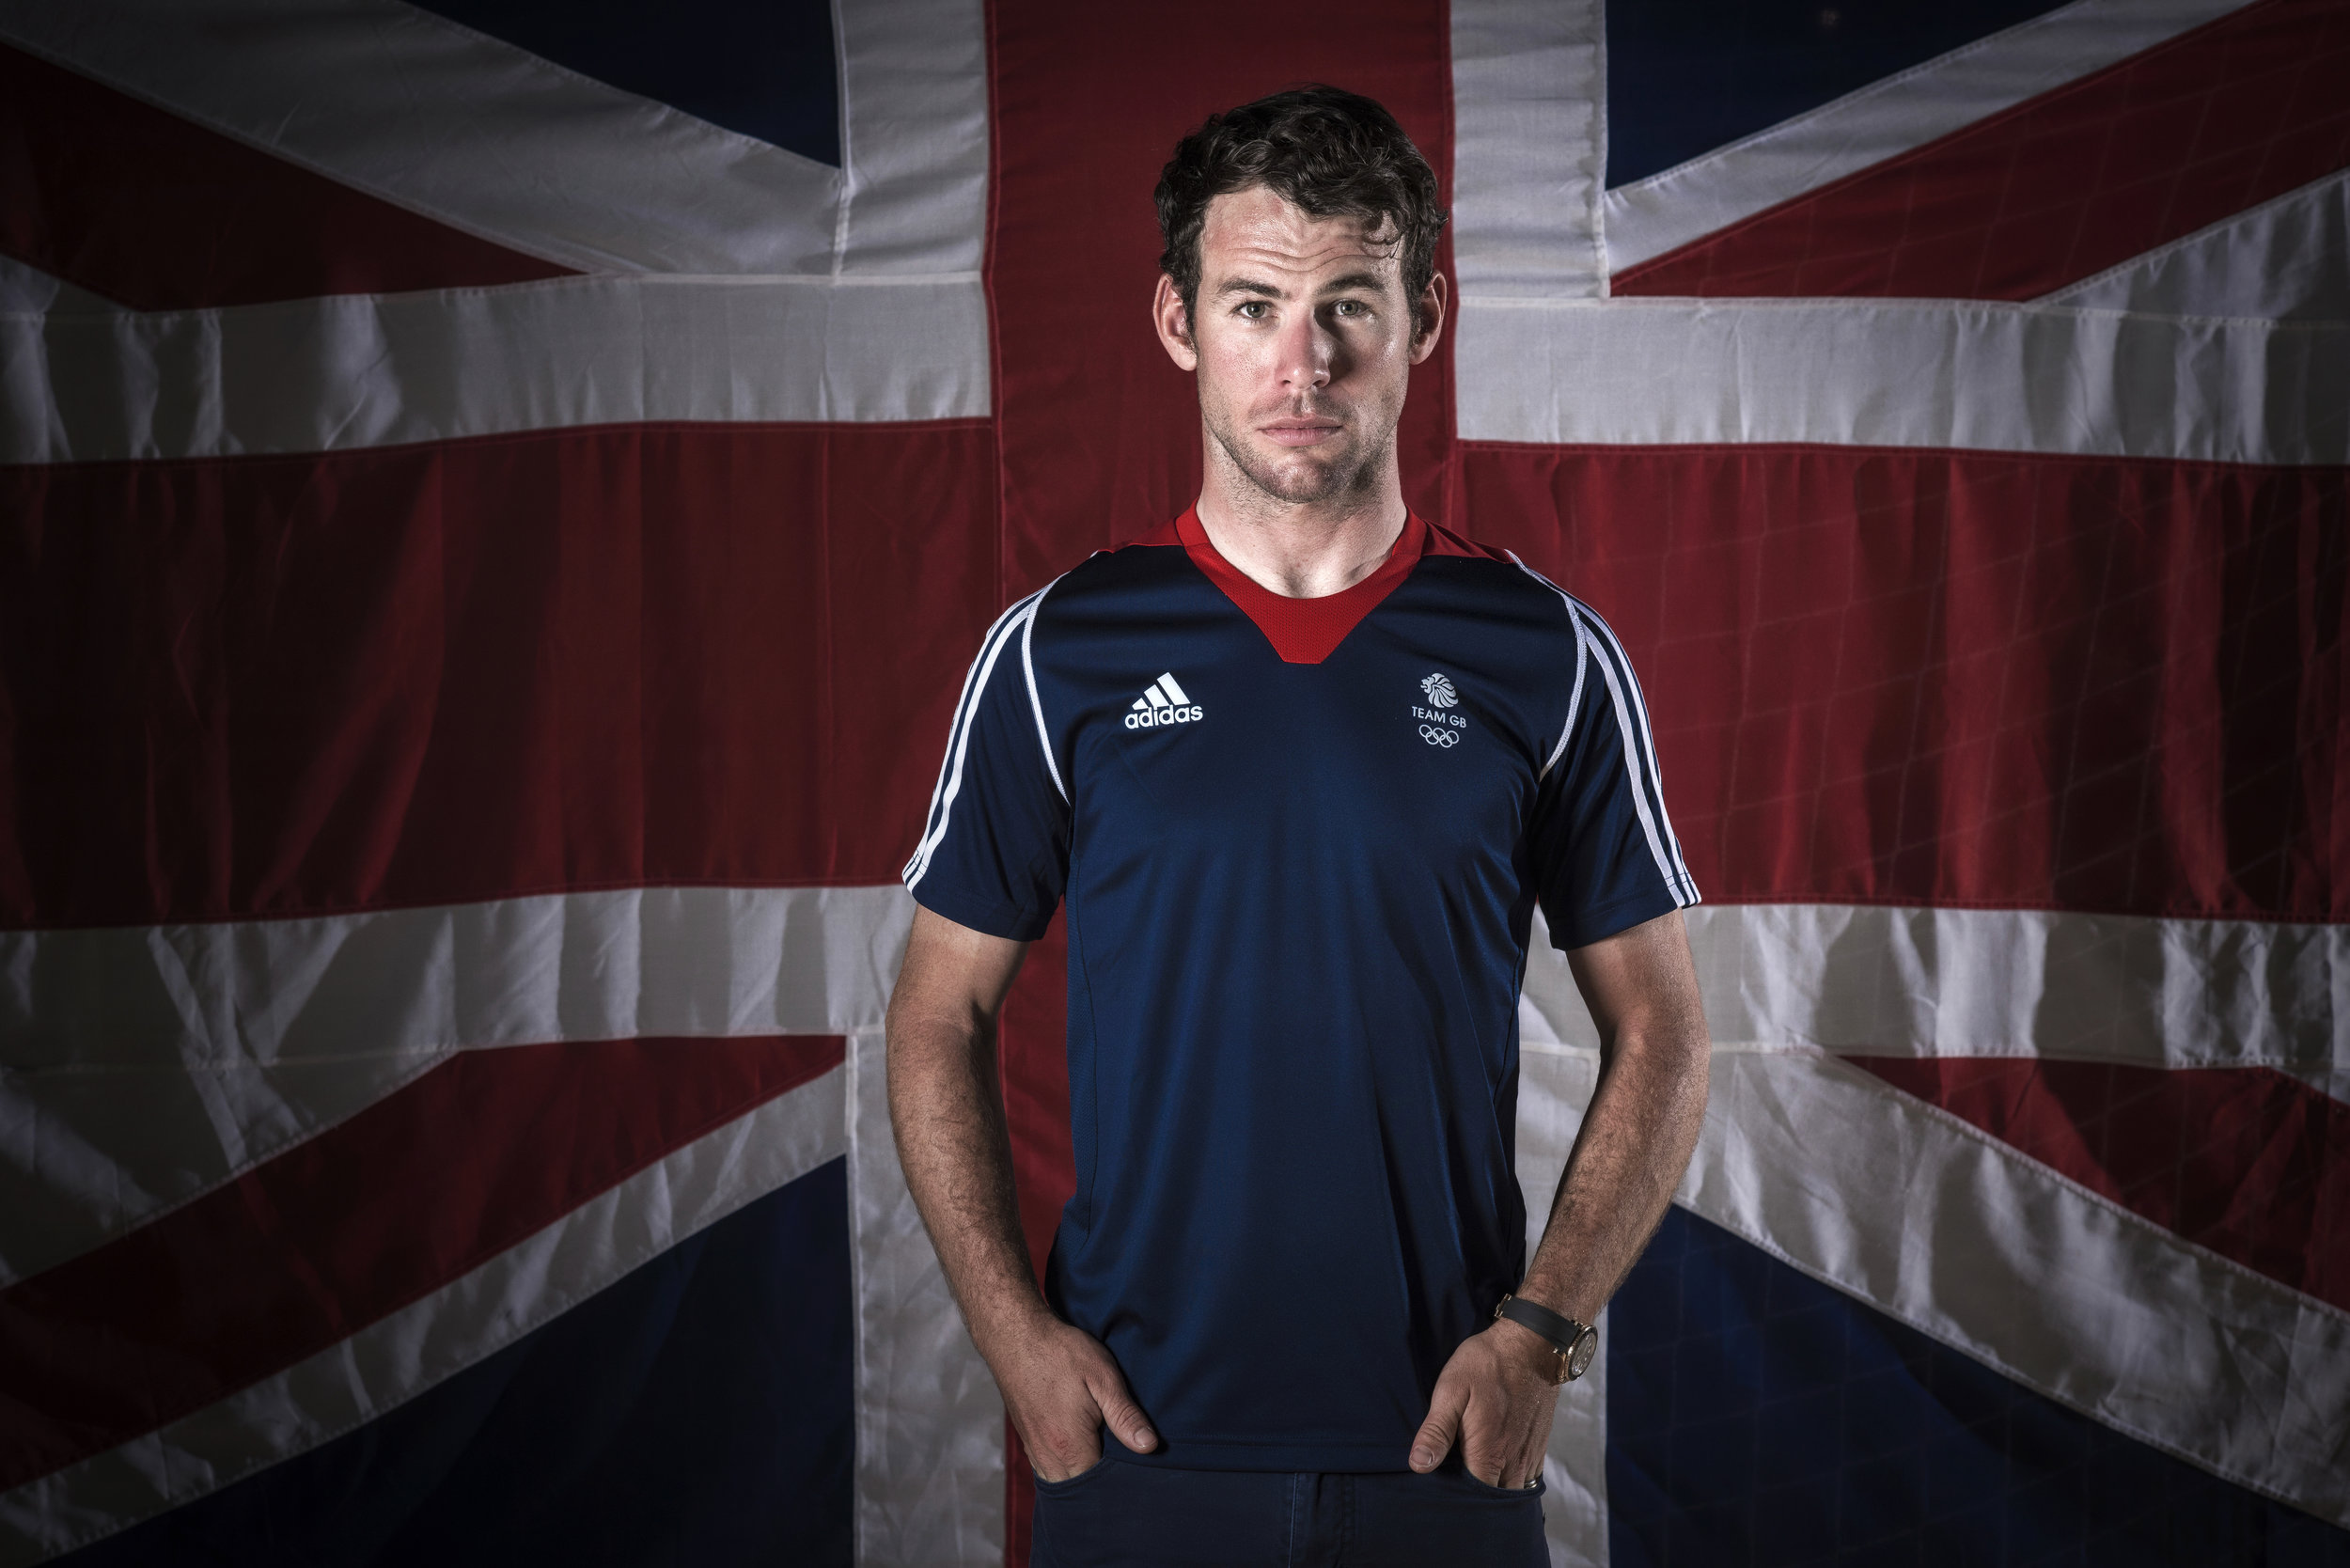  Mark Cavendish of Team GB  the Team GB track cyclists selected to ride in the Rio 2016 Olympic Games on June 24, 2016 in Manchester, England. PHOTO CREDIT PAUL COOPER 